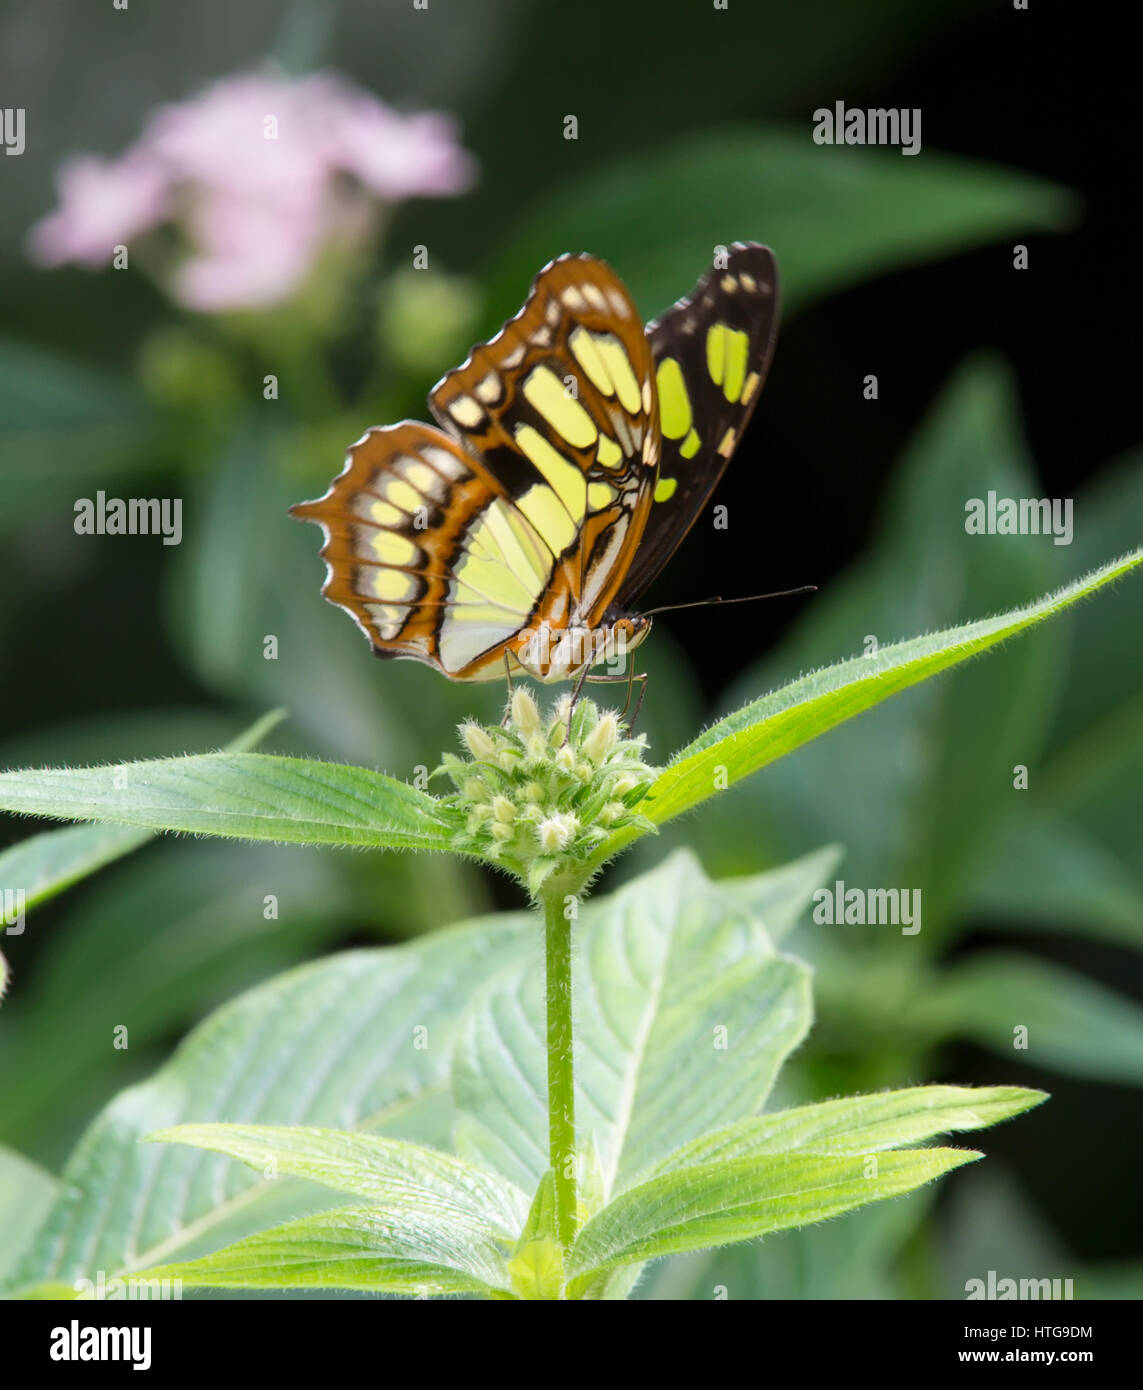 Malachite Butterfly eating nectar from a flower Stock Photo